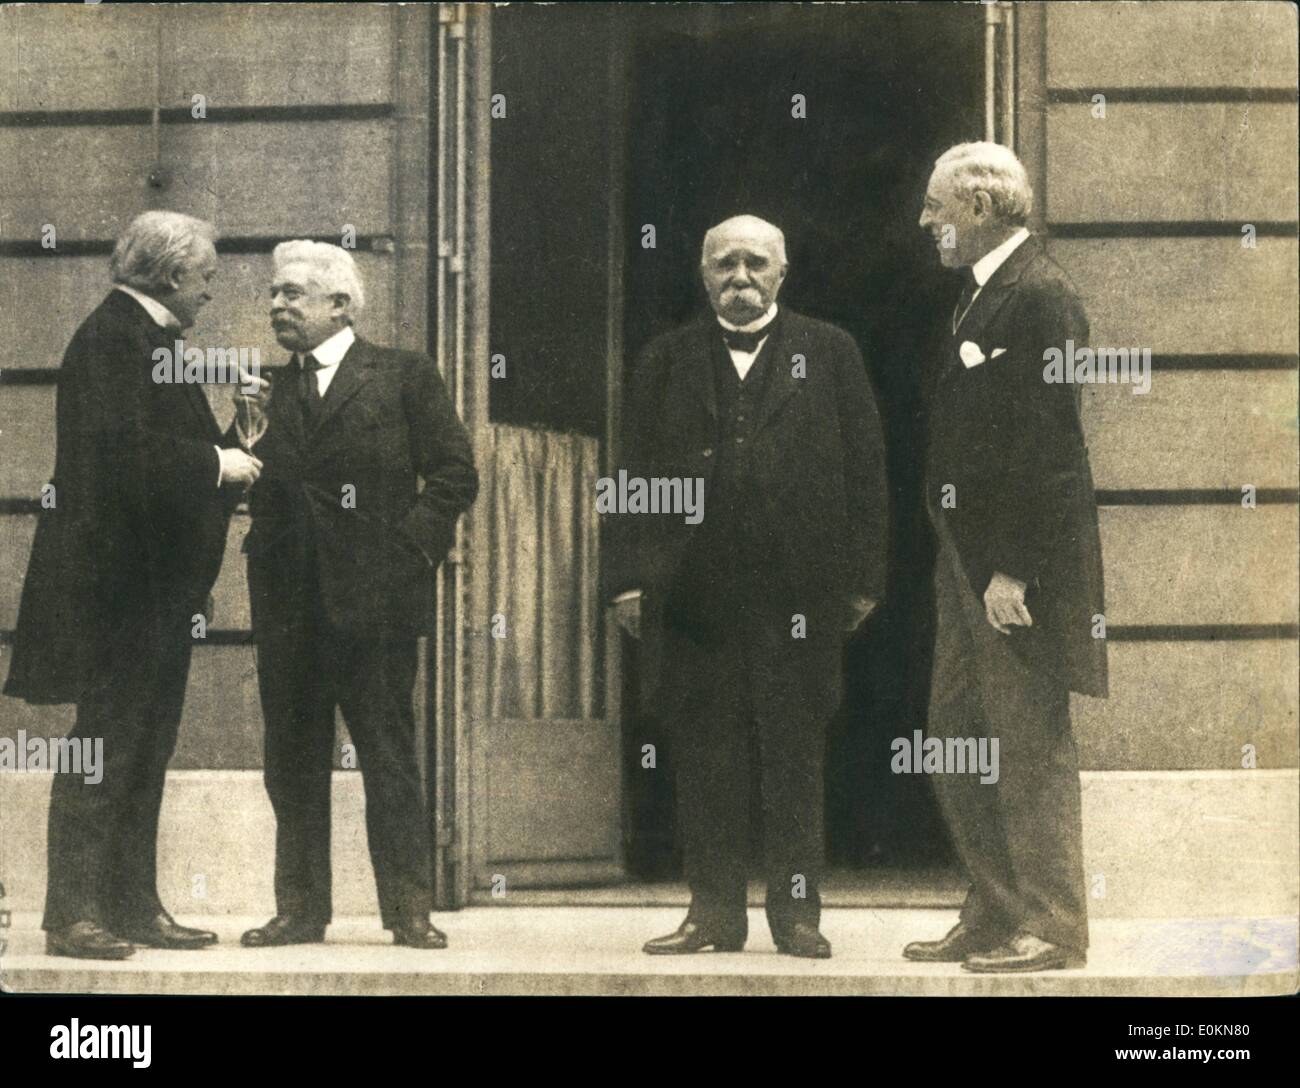 Jun. 06, 1919 - Treaty of Versailles After signing the Peace Treaty with the Germans on June 28 1919 at Versailles, the principal signatories step out on to a terrace. OPS: From left: Lloyd George, British Prime Minister; Italian Premier Orlando; Georges Clemenceau, French Premier and US President Woodrow Wilson. Stock Photo